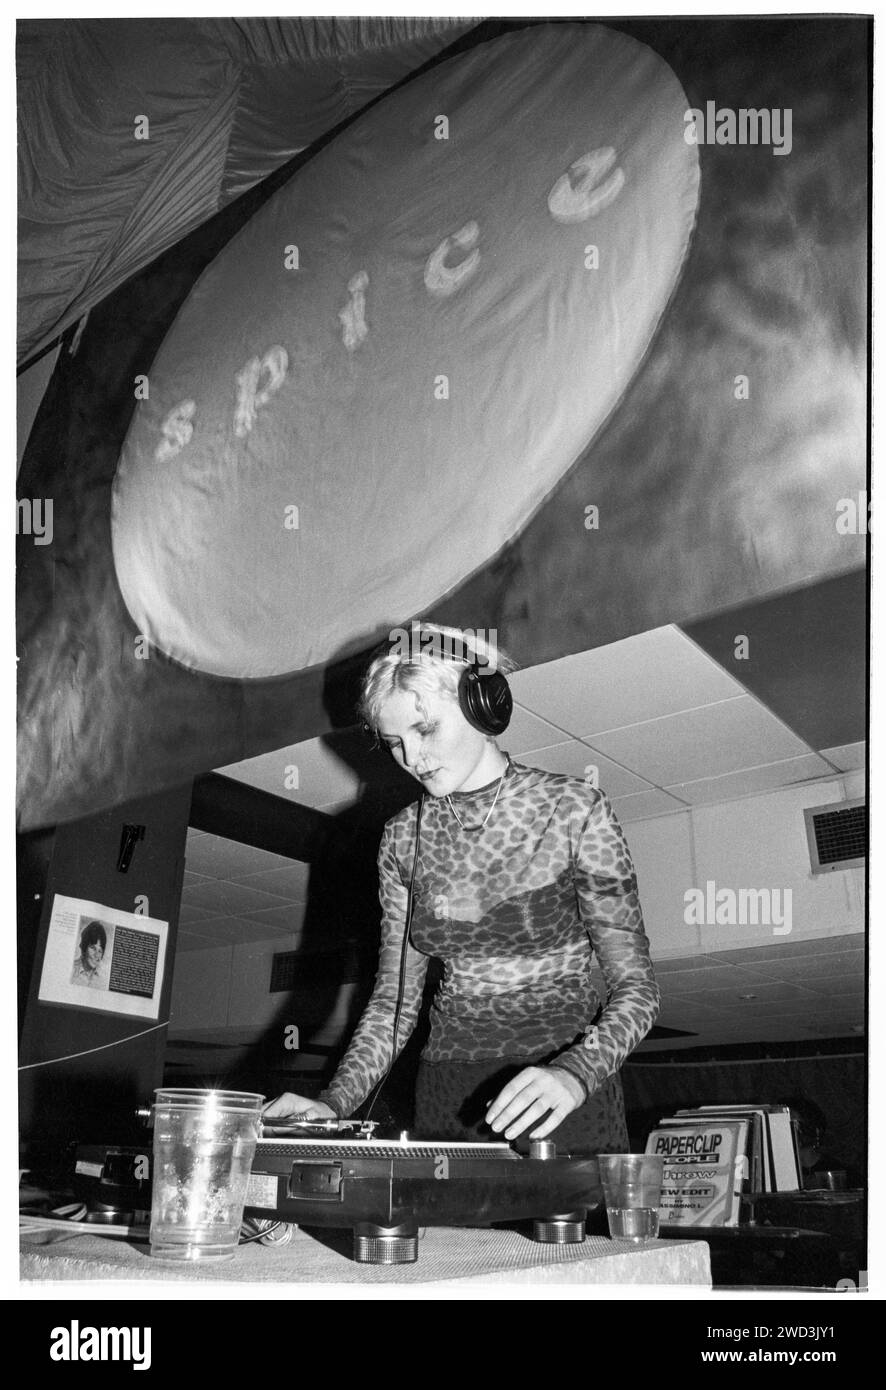 Sister Bliss of Faithless DJing at Spice at Cardiff University Great Hall in Cardiff, Wales on 9 December 1994. Photo: Rob Watkins. INFO: Sister Bliss, born Ayalah Bentovim, is a British DJ, producer, and member of the electronic music group Faithless. Renowned for her contributions to dance and electronic music, she's a pioneer in the genre, known for hits like 'Insomnia' and 'God Is a DJ.' Stock Photo